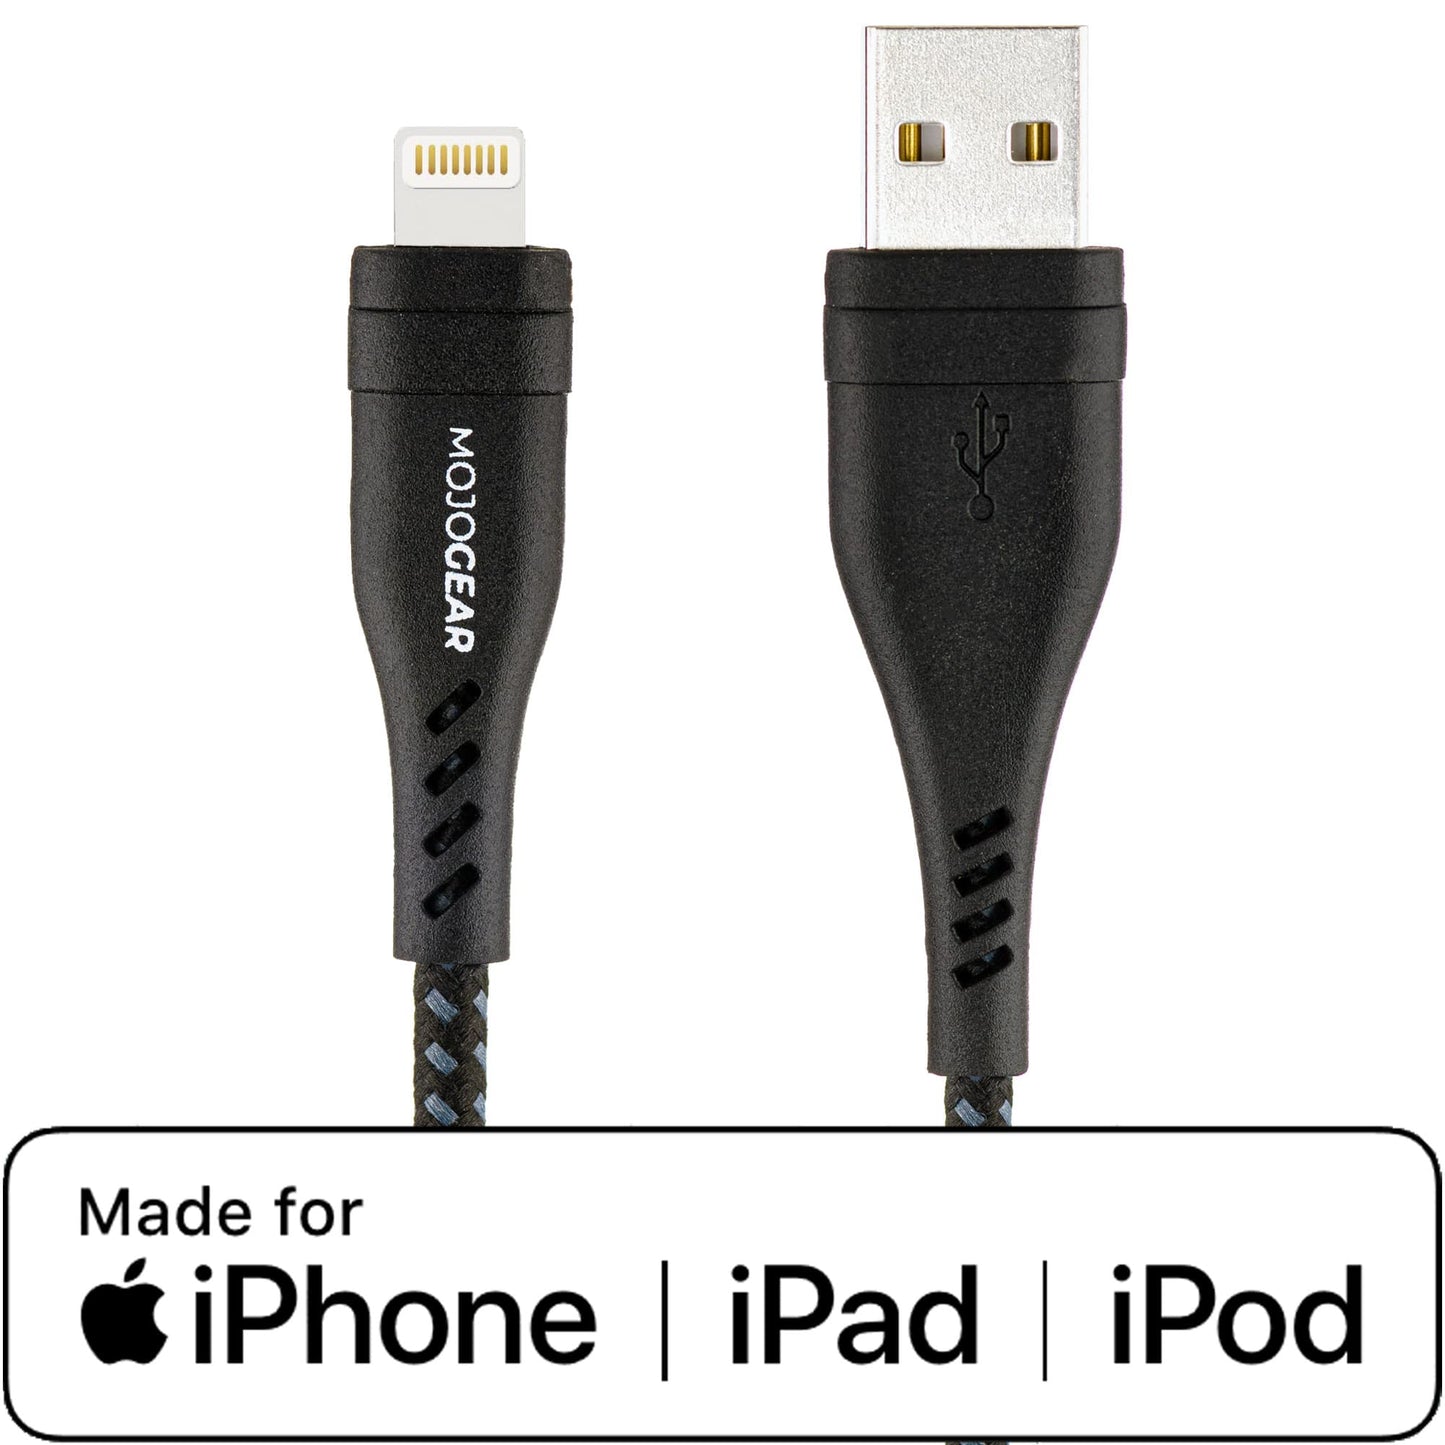 2x MOJOGEAR Apple Lightning to USB cable extra strong [DUO PACK]